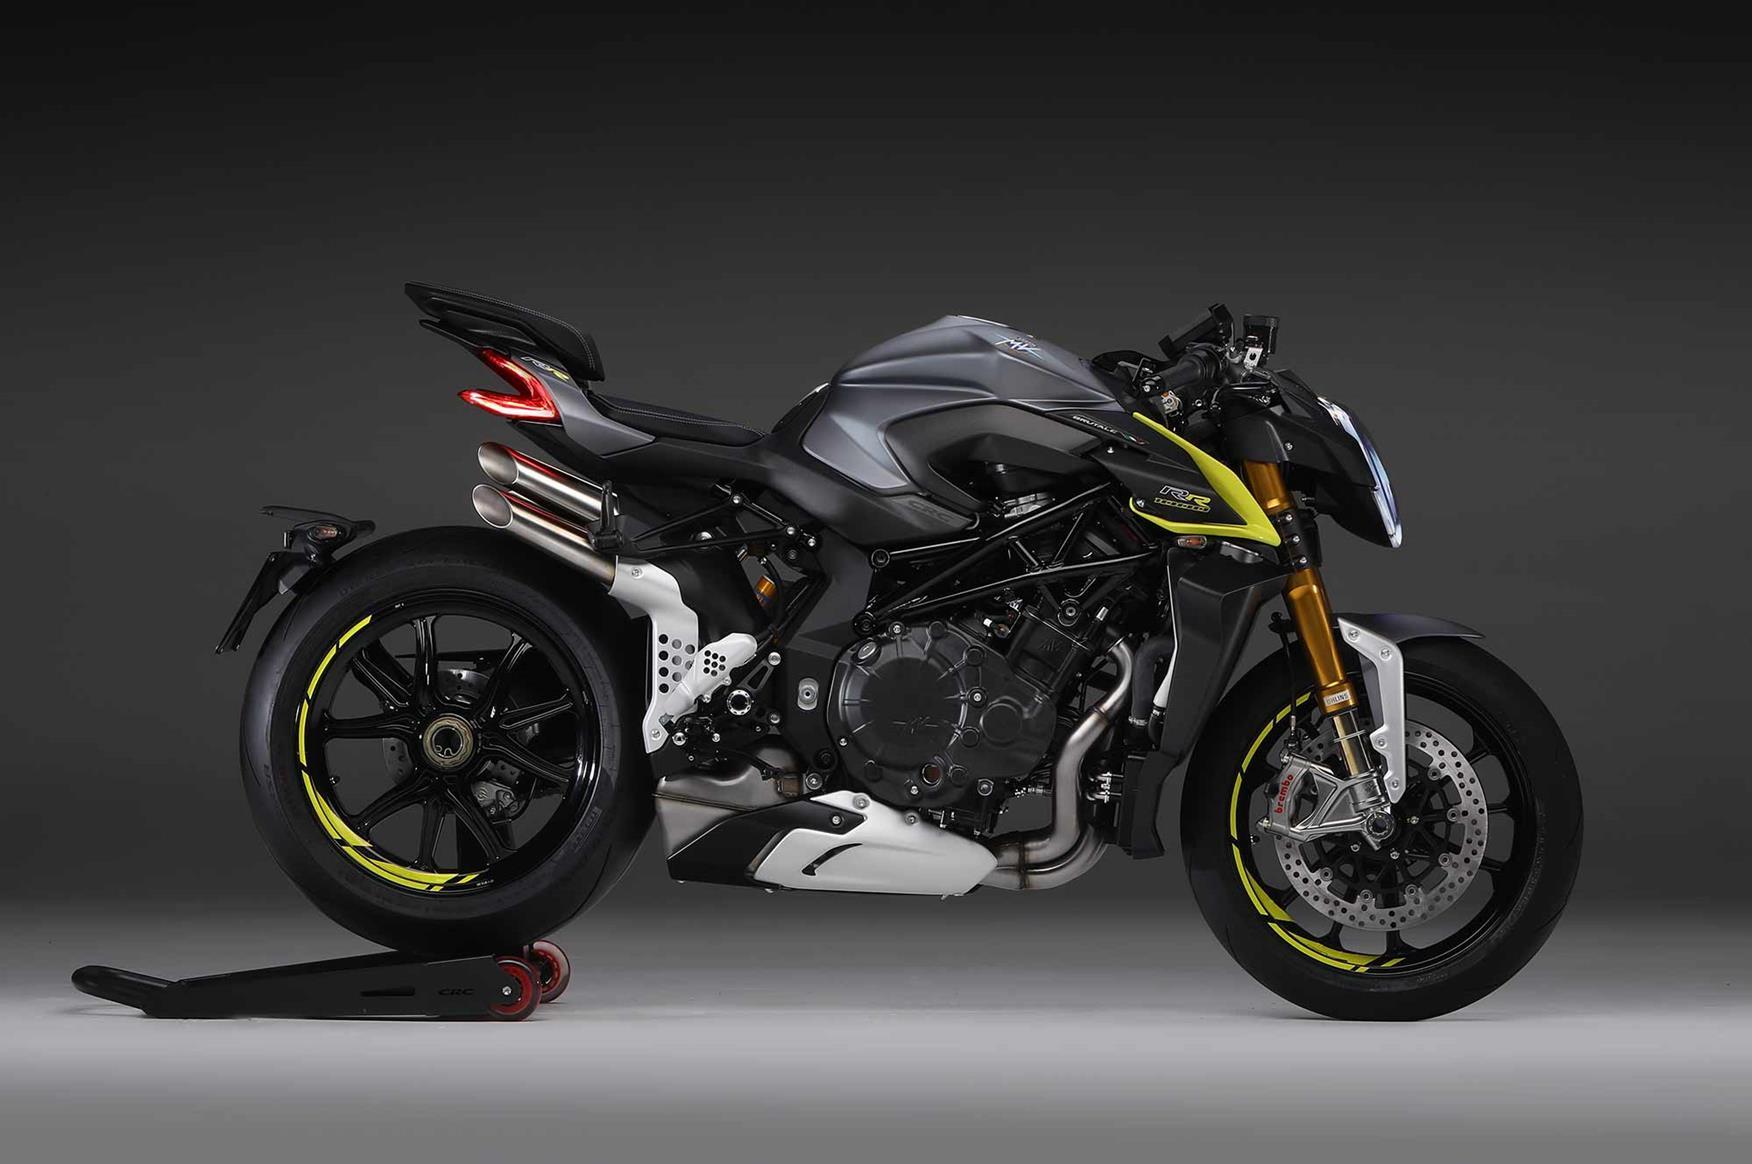 MV Agusta aim for 2020 super naked glory with bonkers